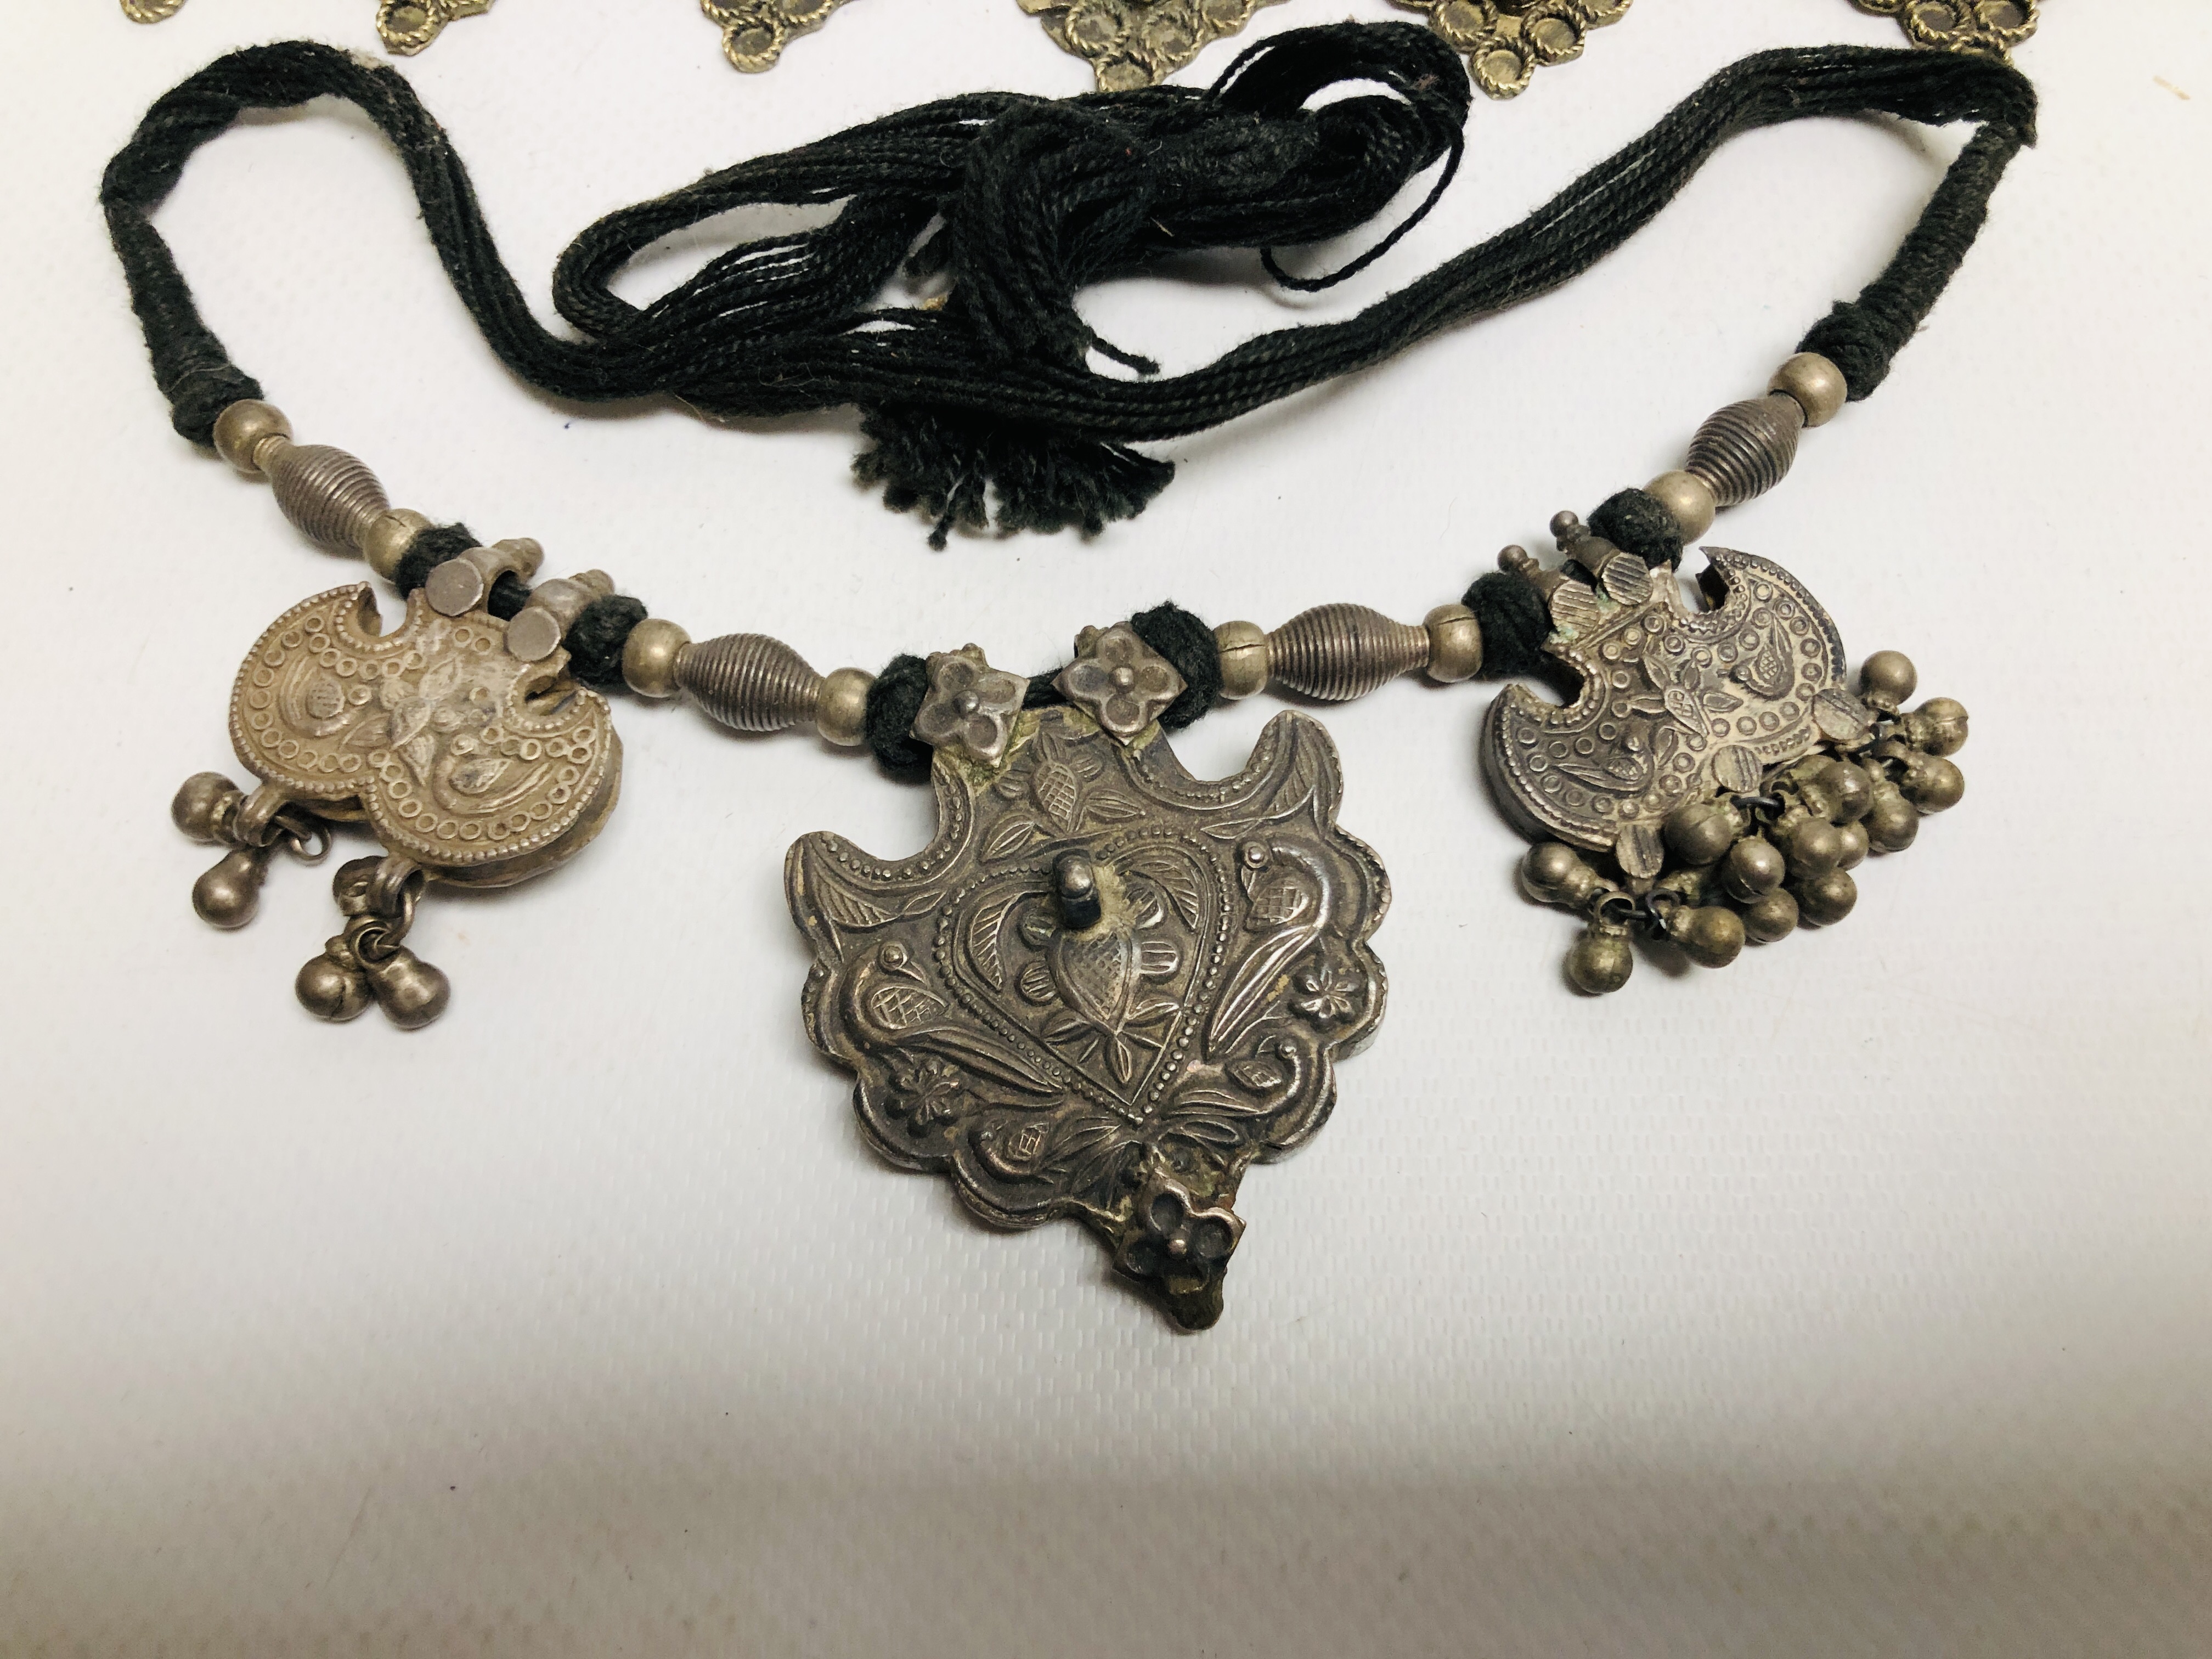 A GROUP OF 5 ELABORATE EASTERN STYLE WHITE METAL NECKLACES TO INCLUDE CHOKER EXAMPLES. - Image 2 of 8